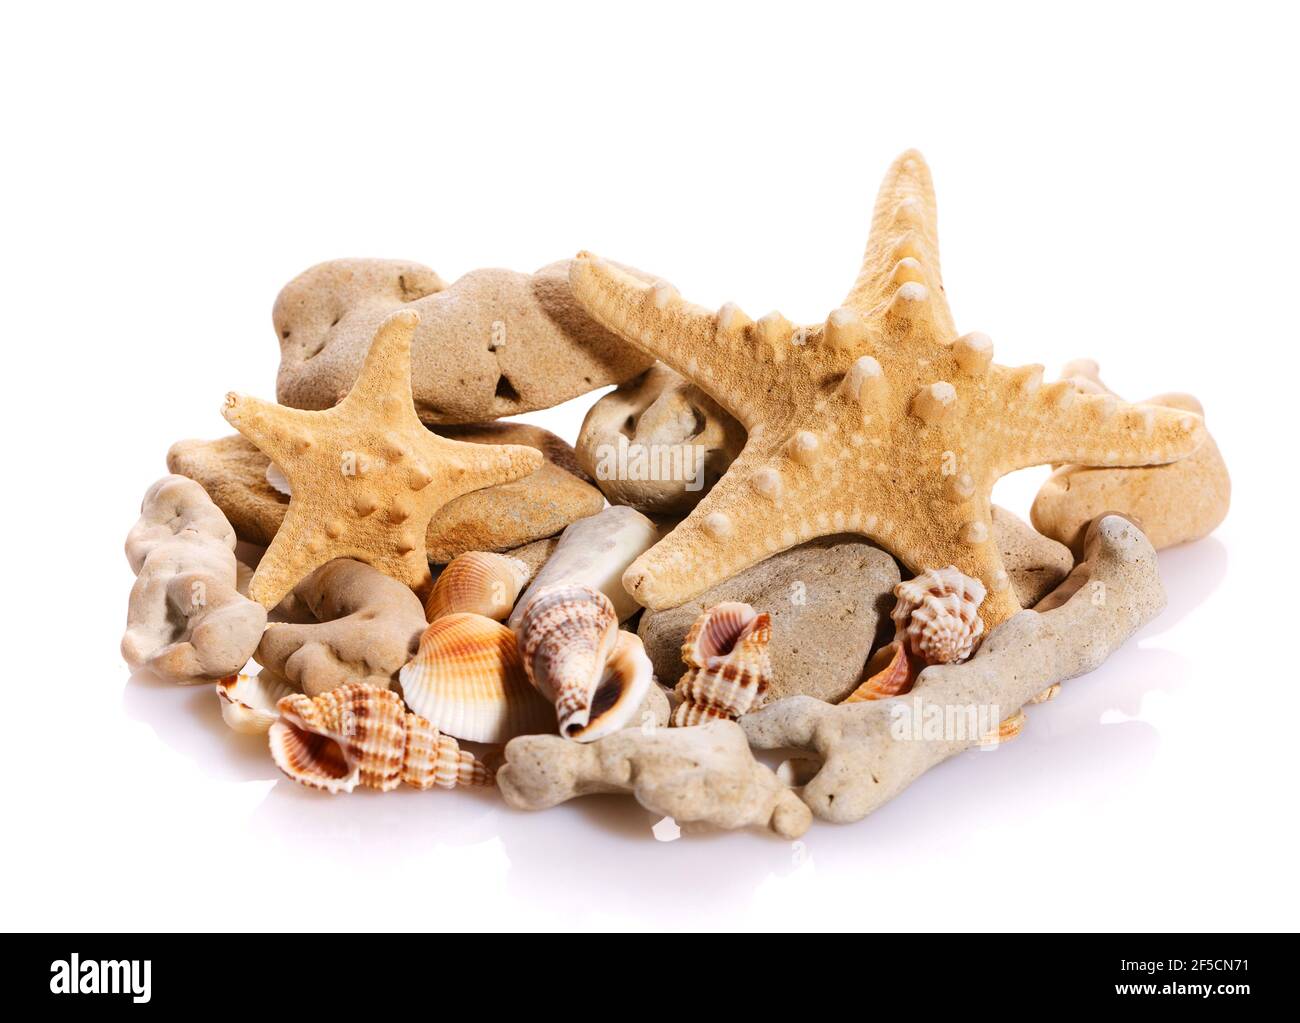 Seashells, pebbles and starfish stacked together on a white background. Natural materials. Stock Photo